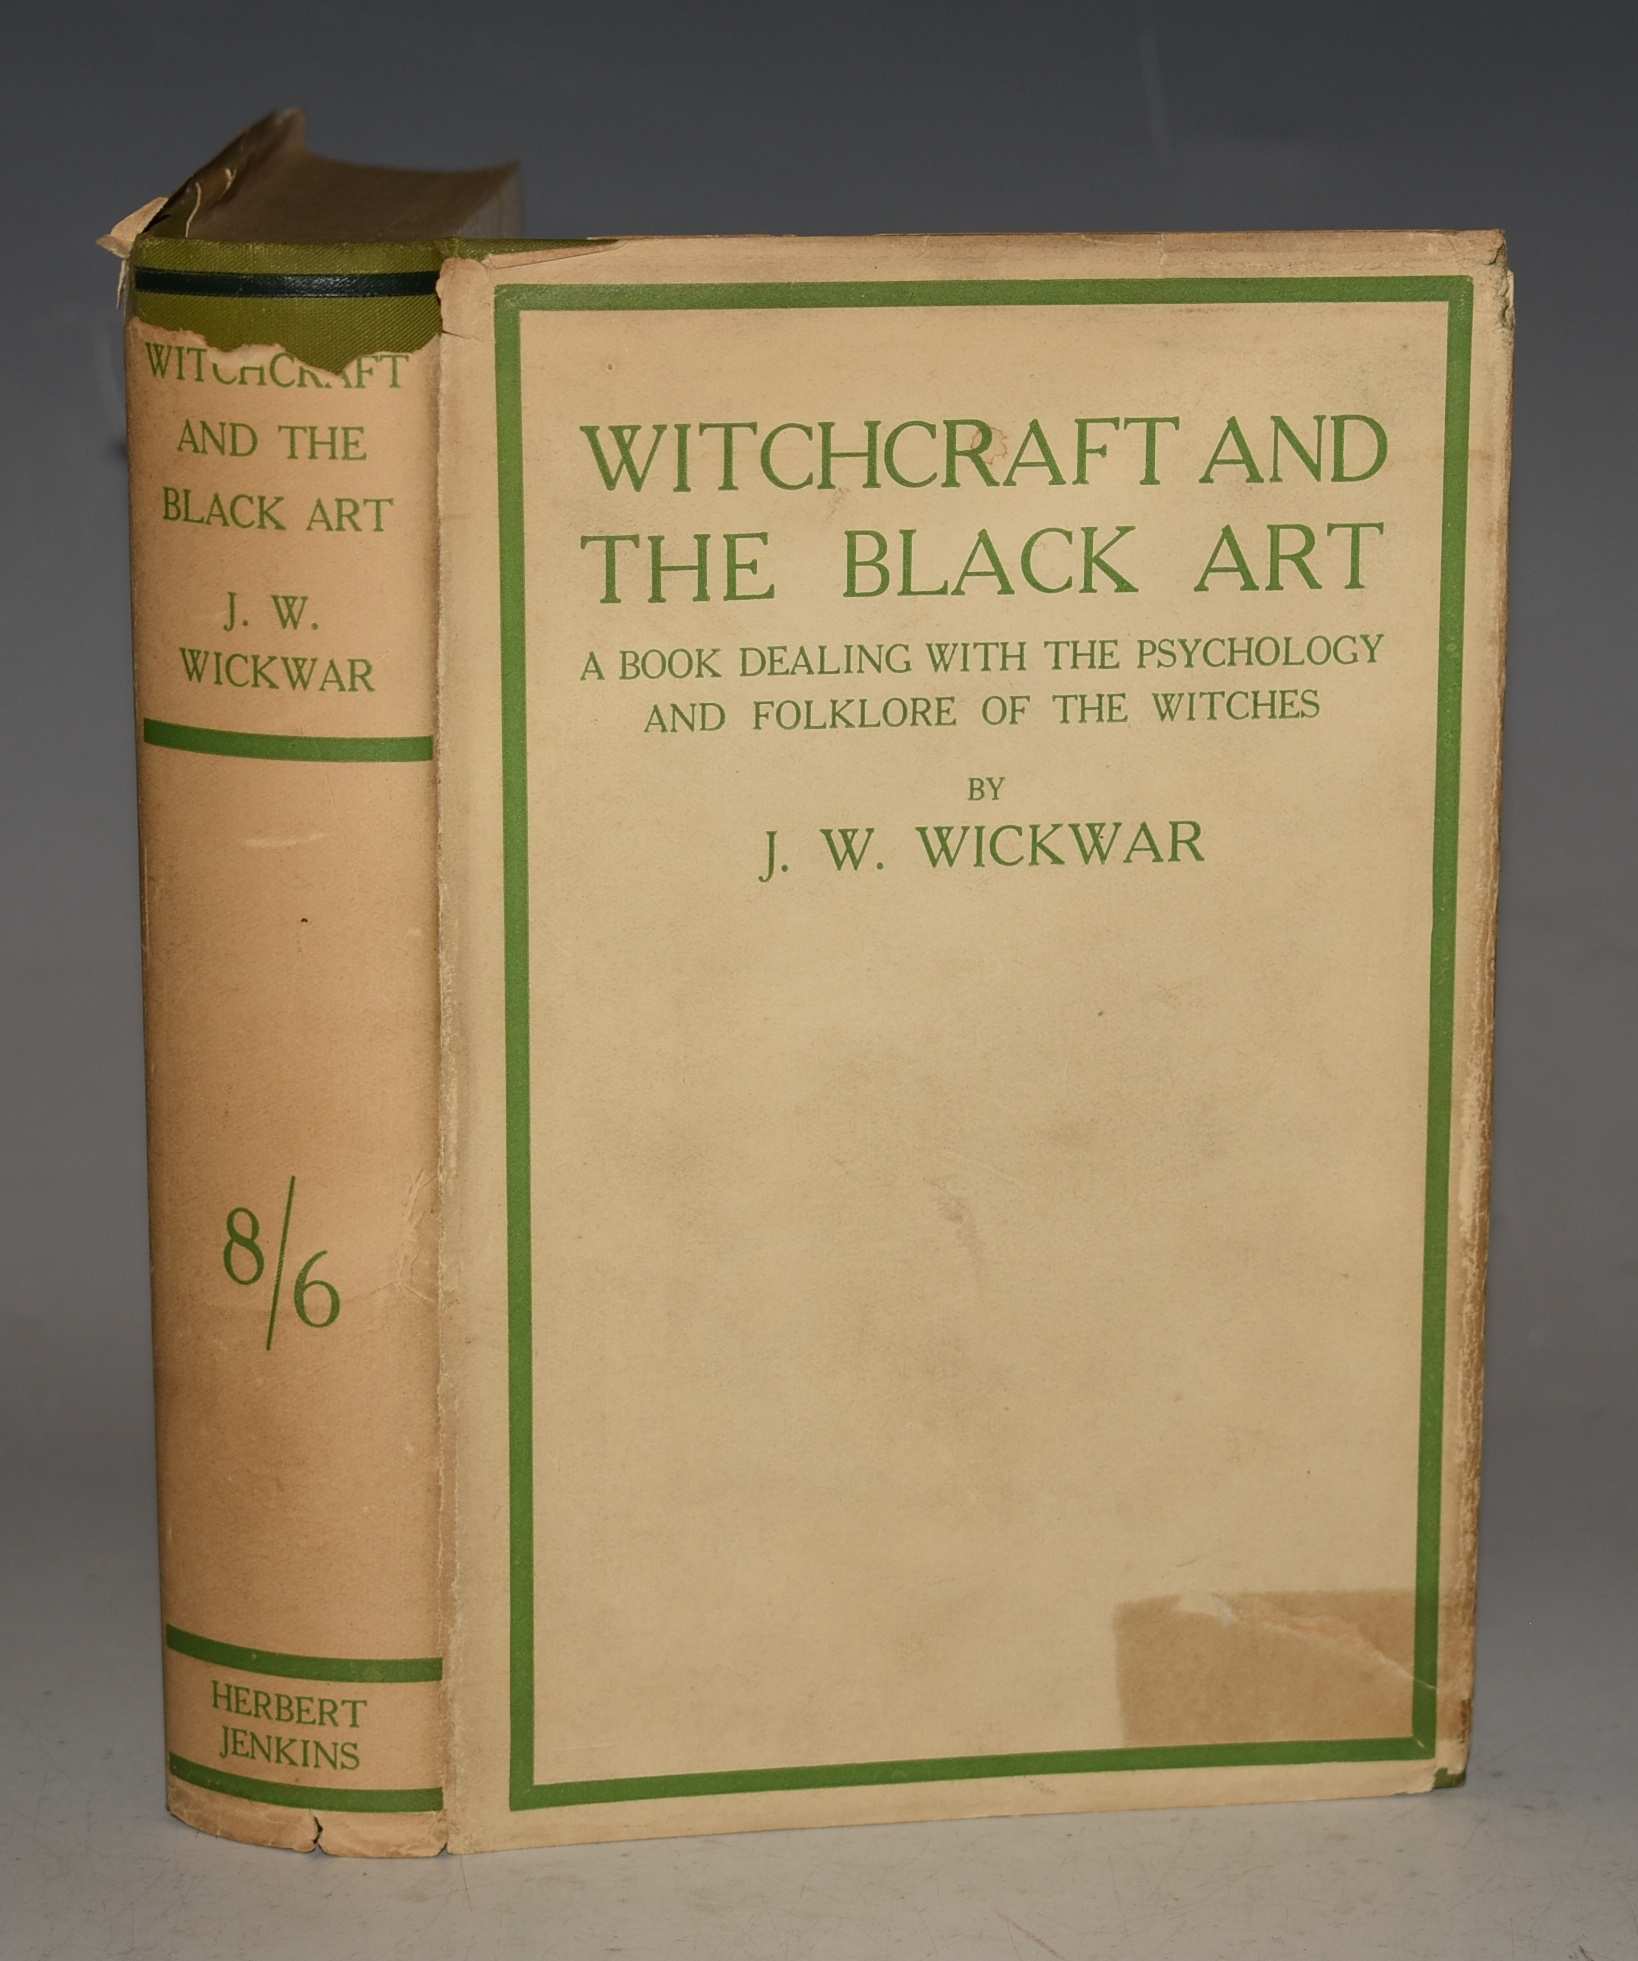 Witchcraft And The Black Art. A Book Dealing With the Psychology and Folklore of the Witches. - WICKWAR, J.W.